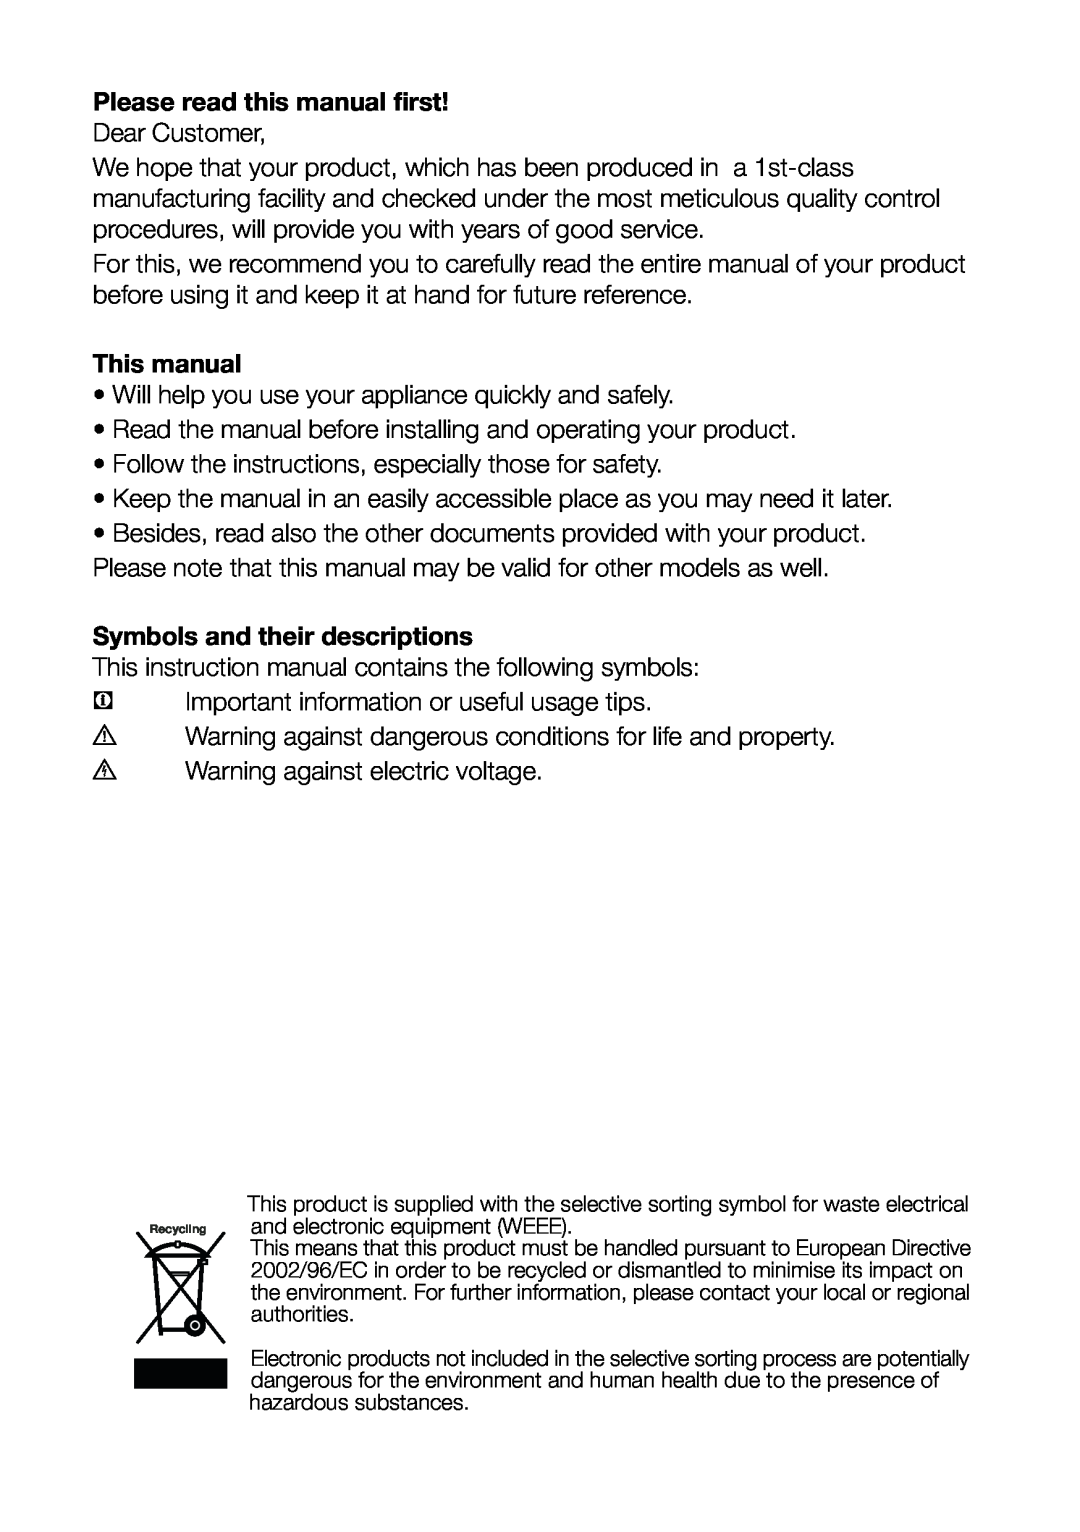 Beko CS 6914 APW Please read this manual first, This manual, Symbols and their descriptions 